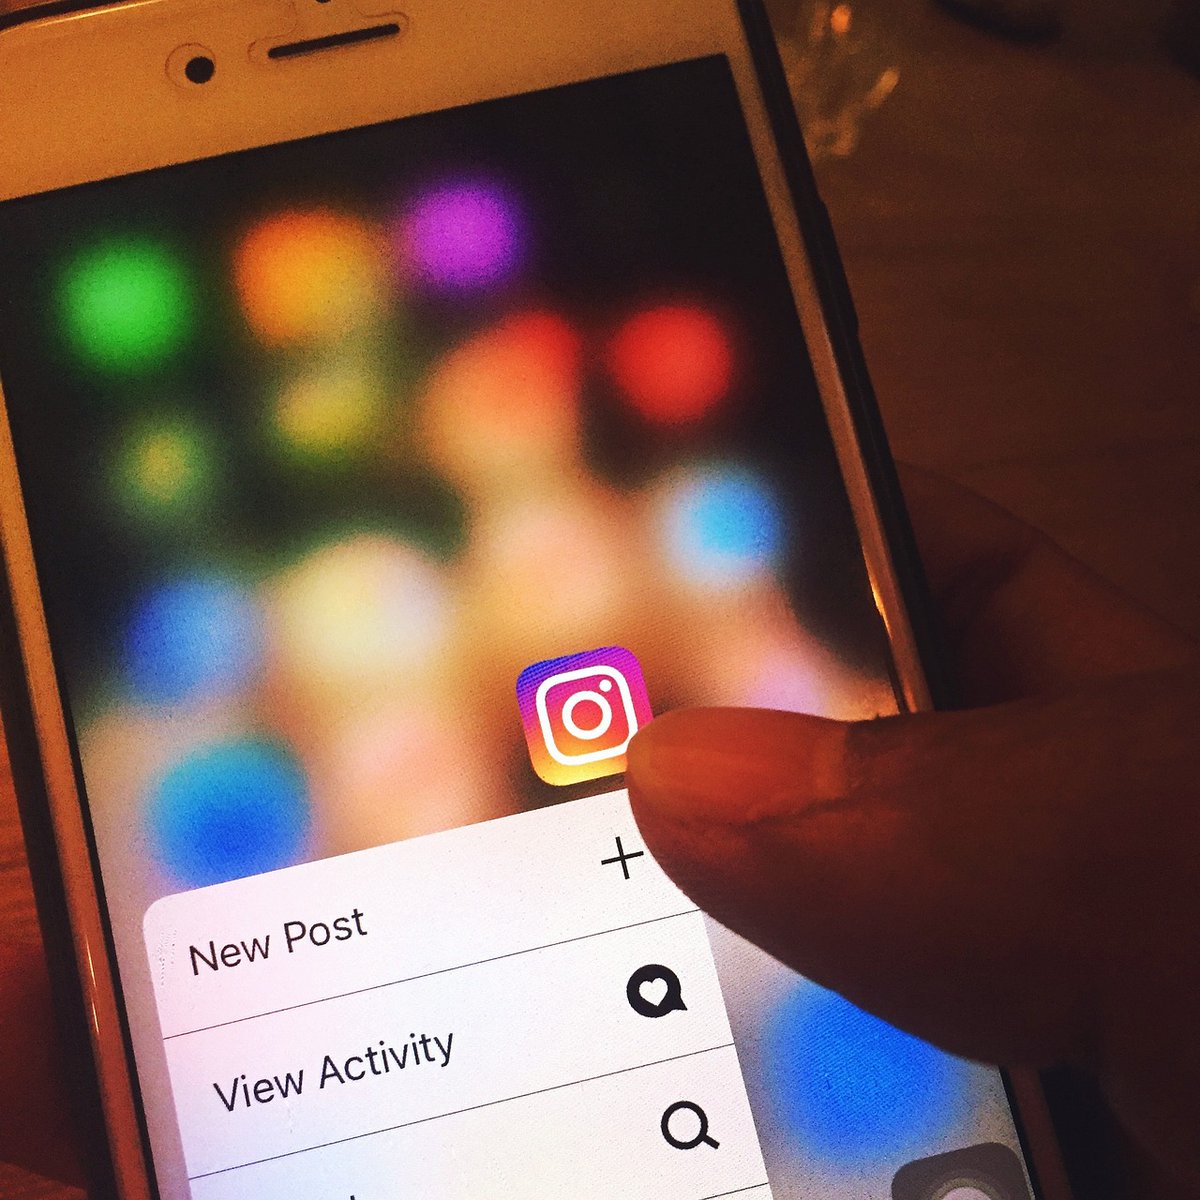 Seadbeady's Fashion and Lifestyle Blog: How to Get Your Instagram Story Noticed: Tips and Tricks seadbeady.blogspot.com/2023/05/how-to… #Lifestyle @LifestyleBlogzz #TeamBlogger @BloggersHut #BloggersHutRT #Blogger #Fashion #BBlogRT #Beauty